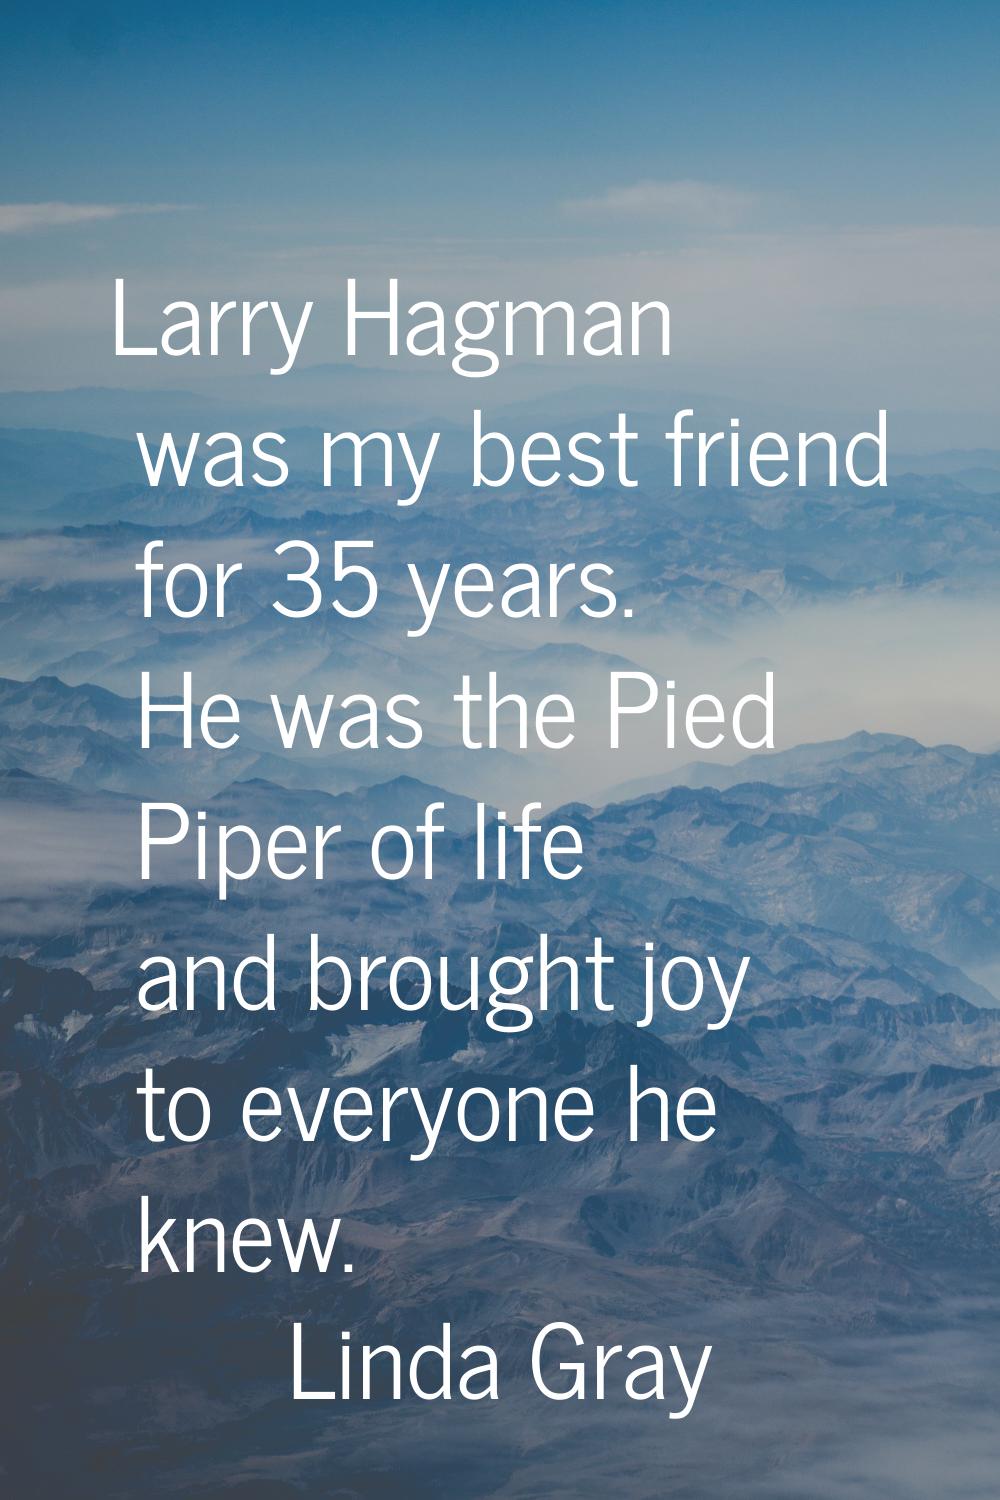 Larry Hagman was my best friend for 35 years. He was the Pied Piper of life and brought joy to ever